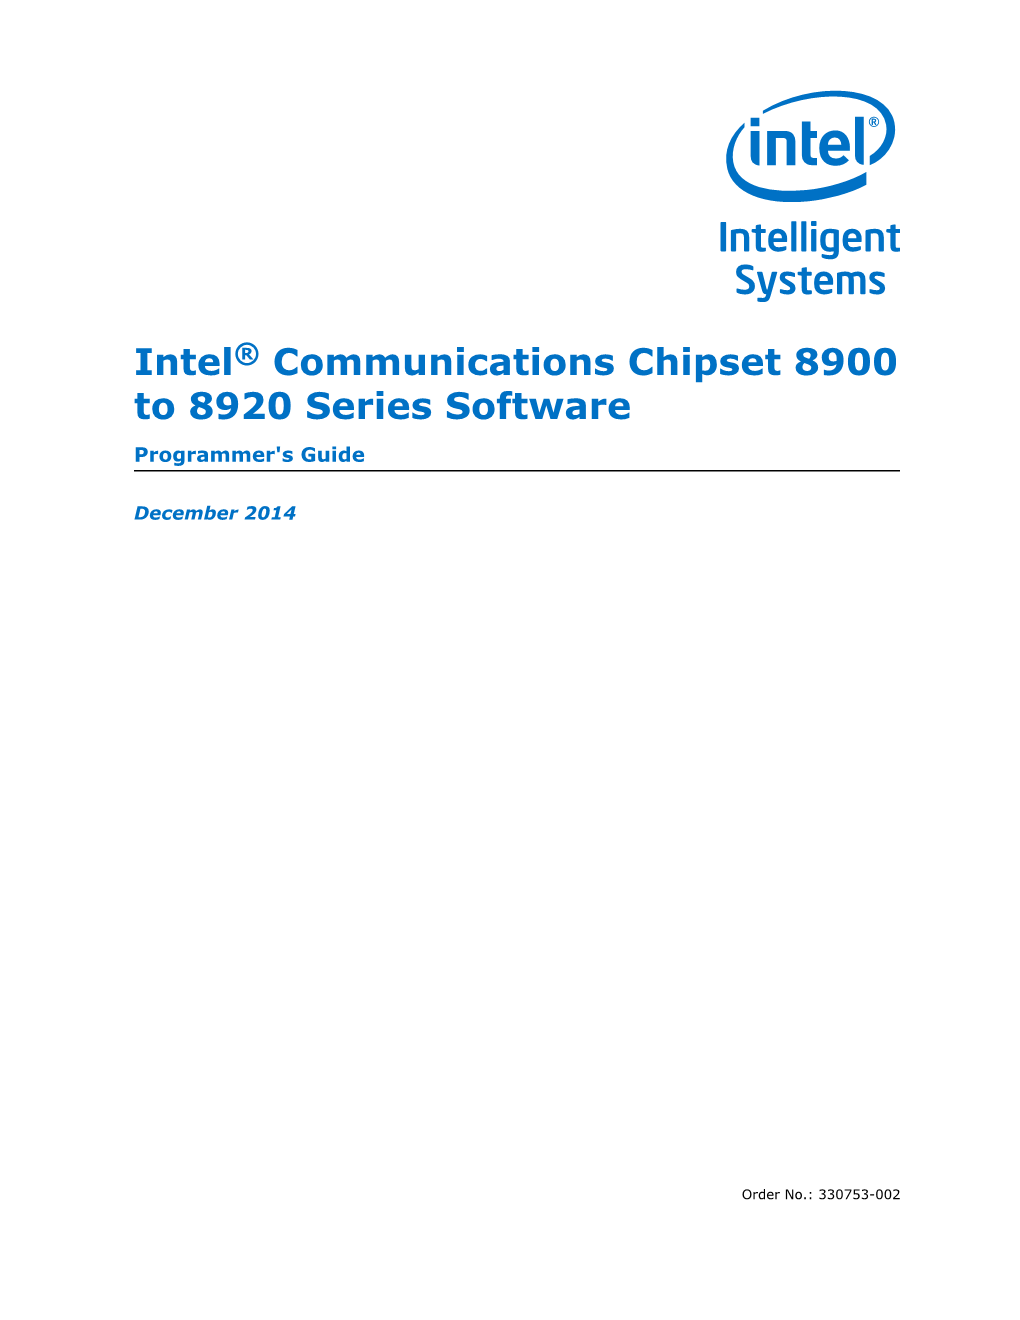 Intel® Communications Chipset 8900 to 8920 Series Software Programmer's Guide